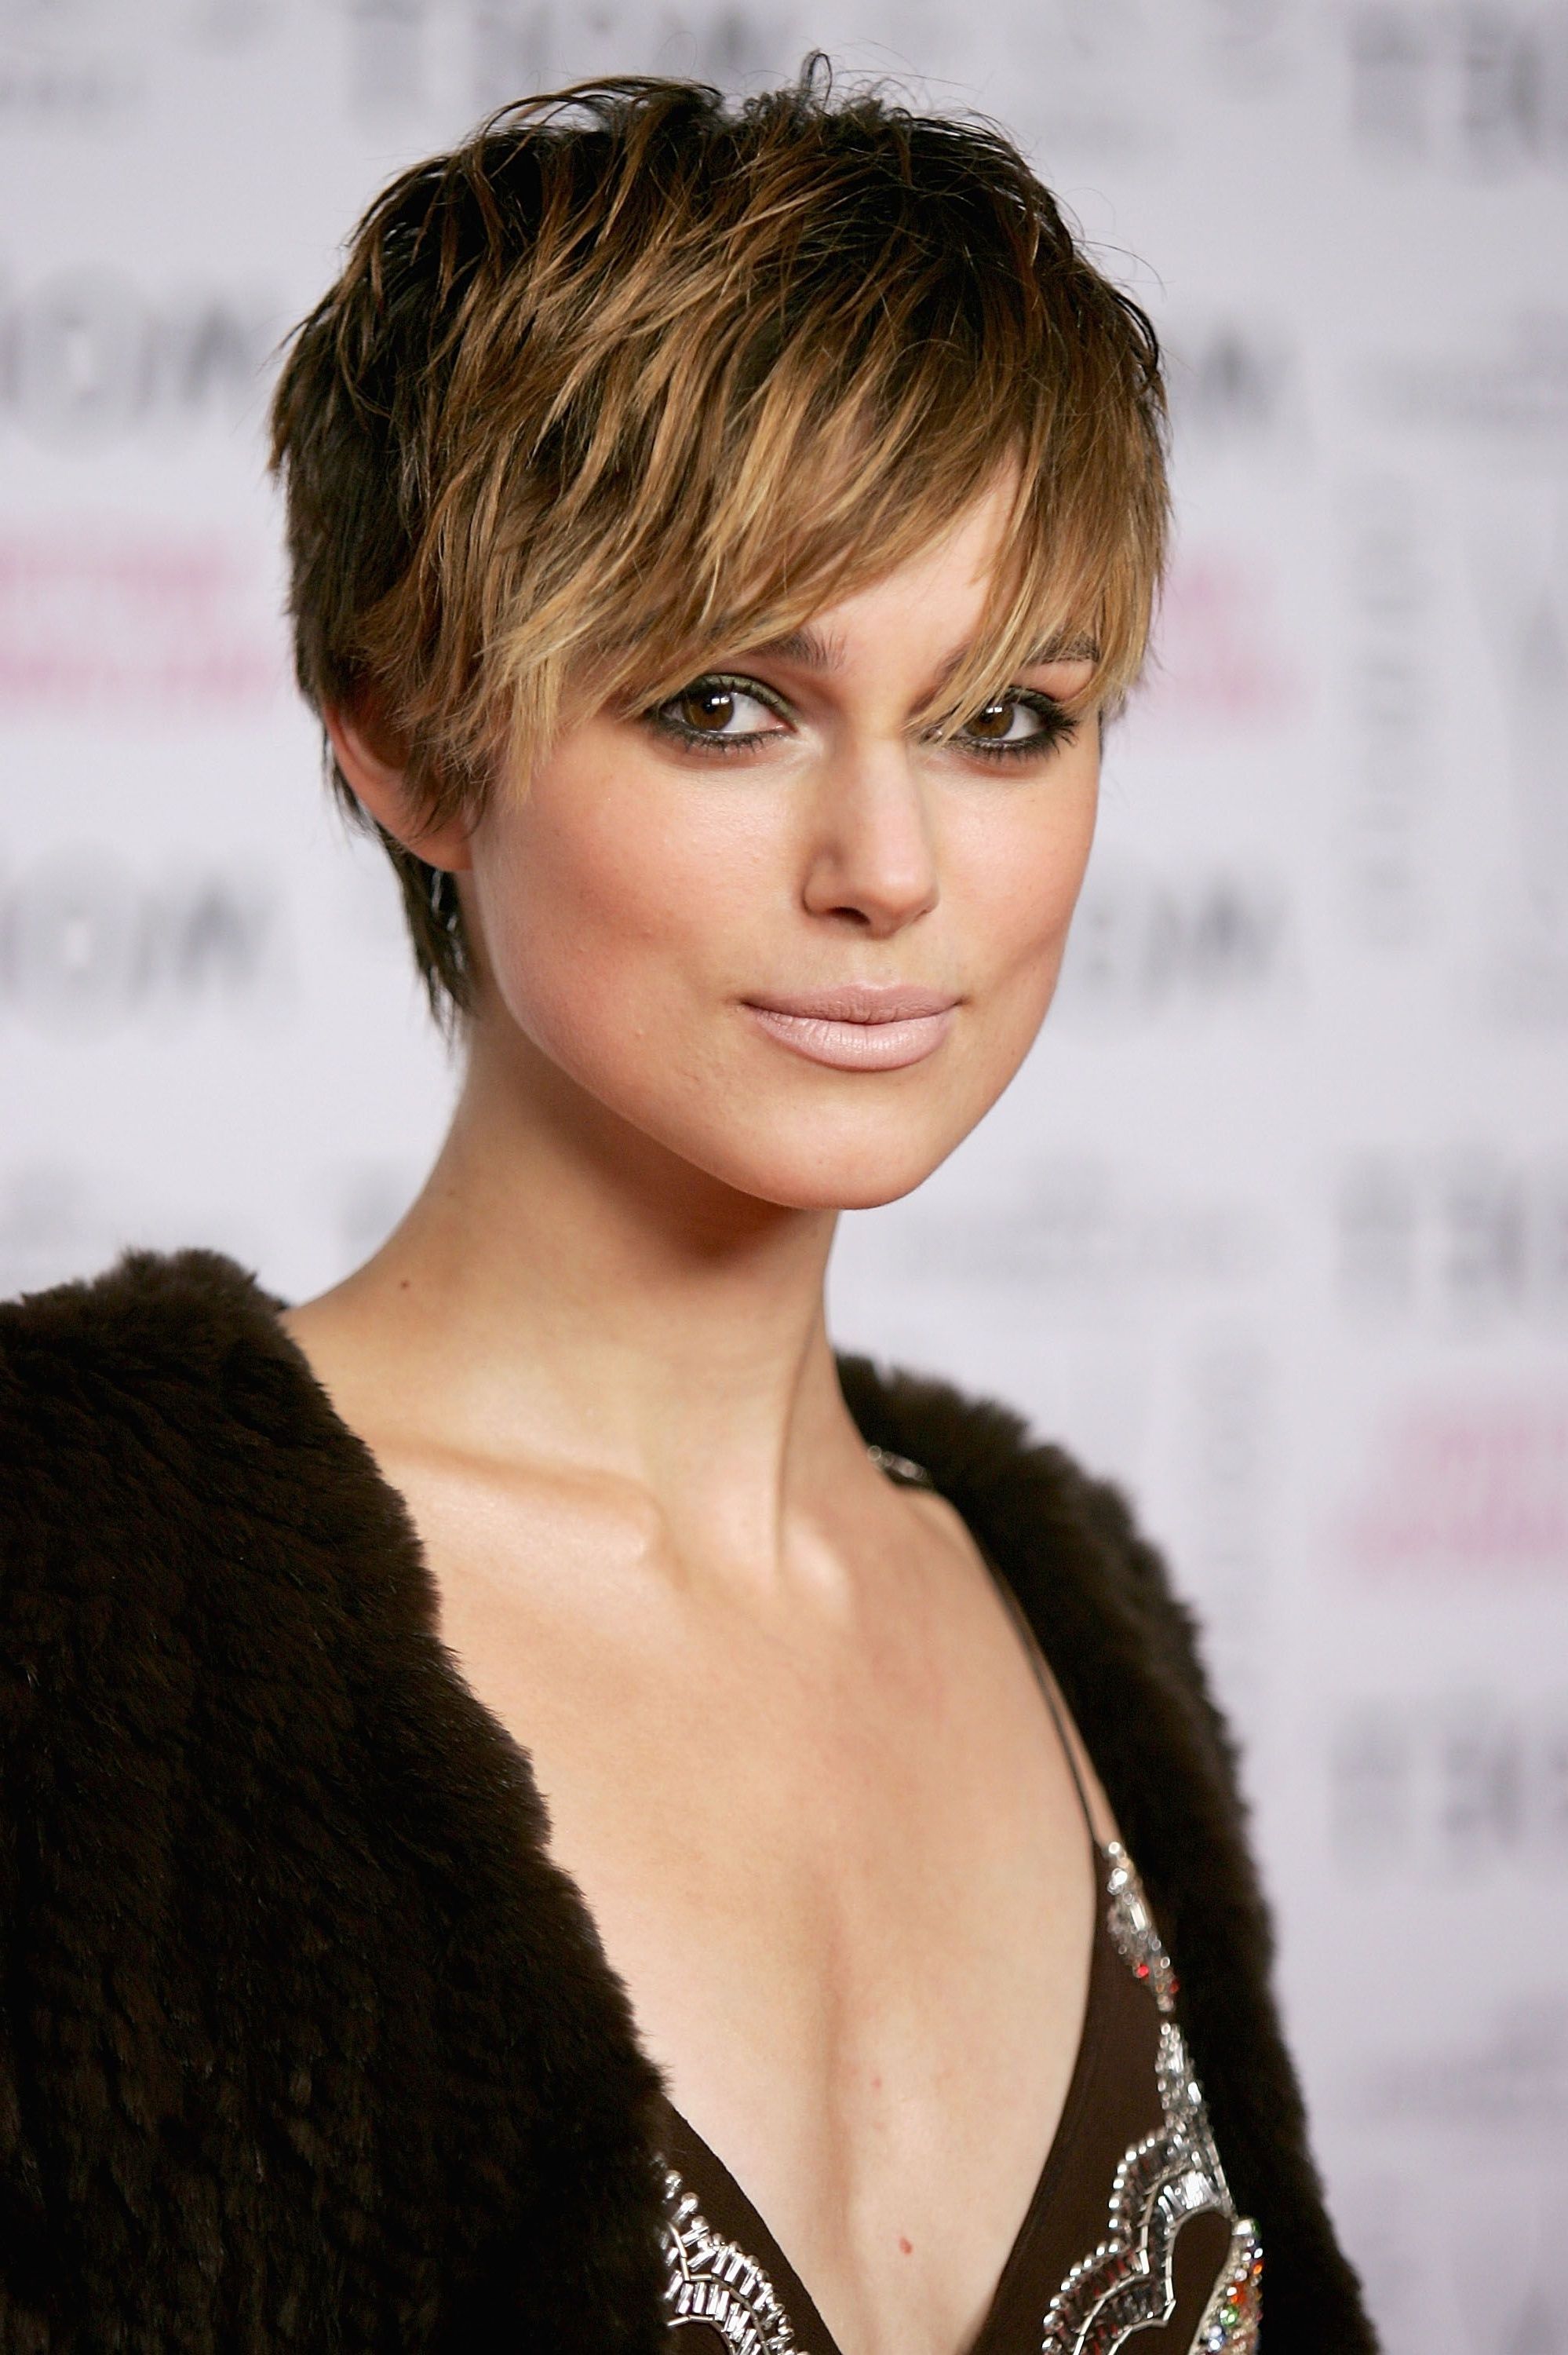 53 Best Pixie Cut Hairstyle Ideas 2018 – Cute Celebrity Pixie Haircuts Intended For Most Current Rocker Pixie Haircuts (View 5 of 15)